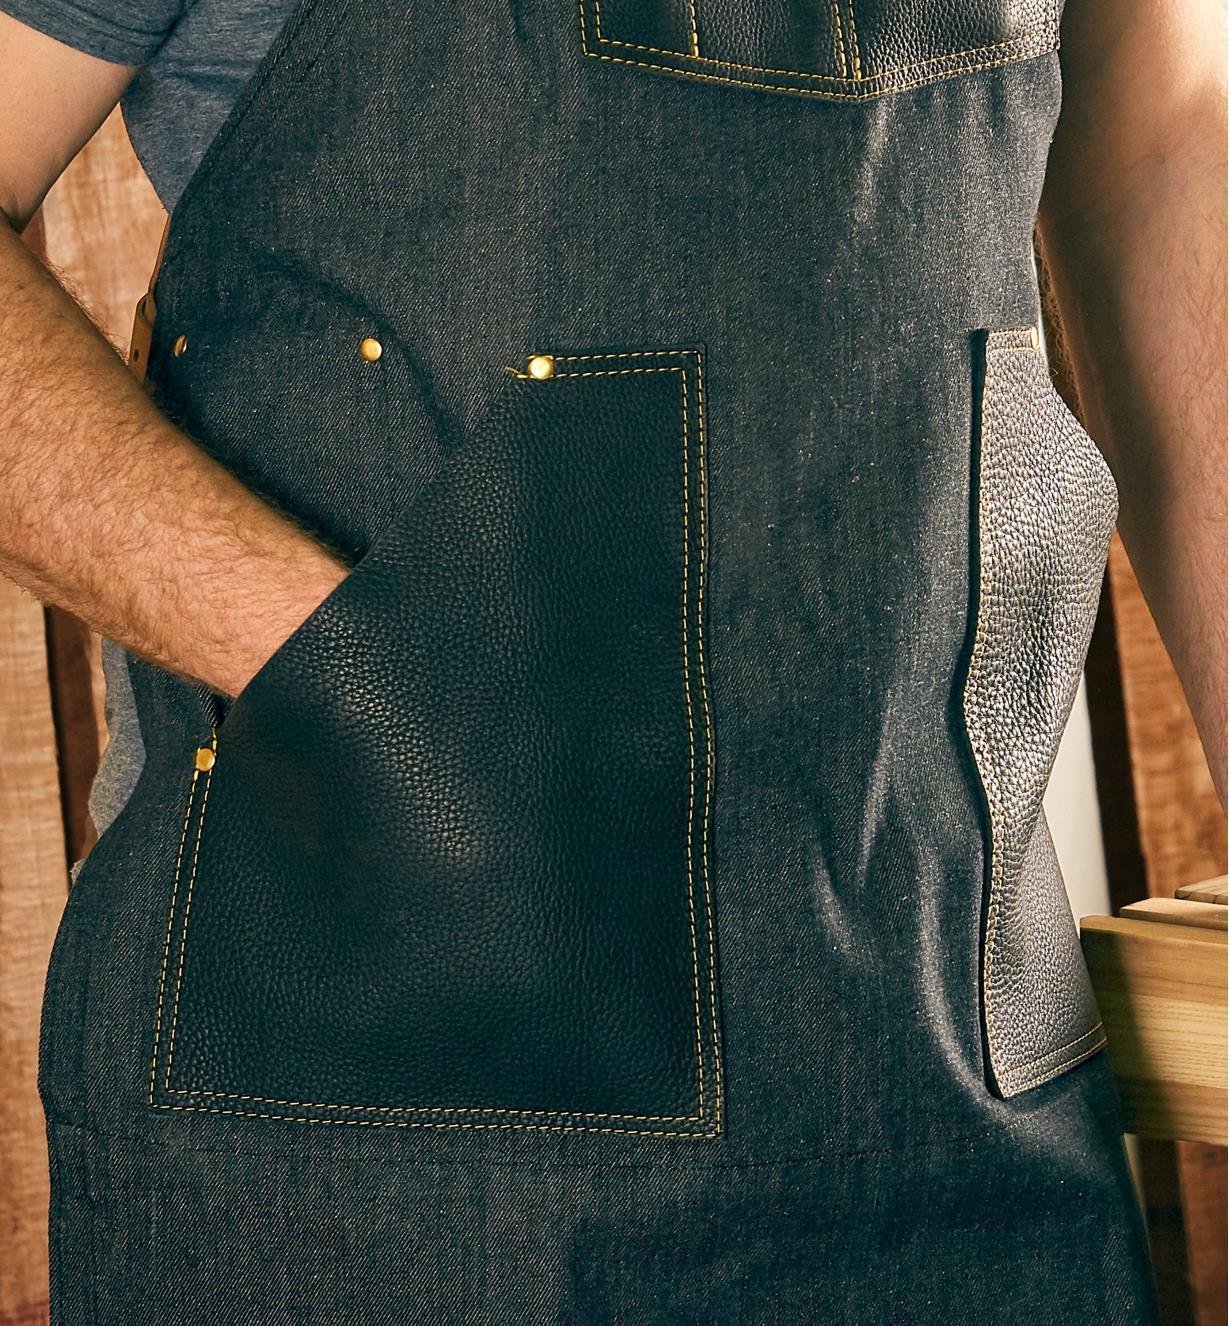 A hand in one of the All-Purpose Apron’s lap pockets